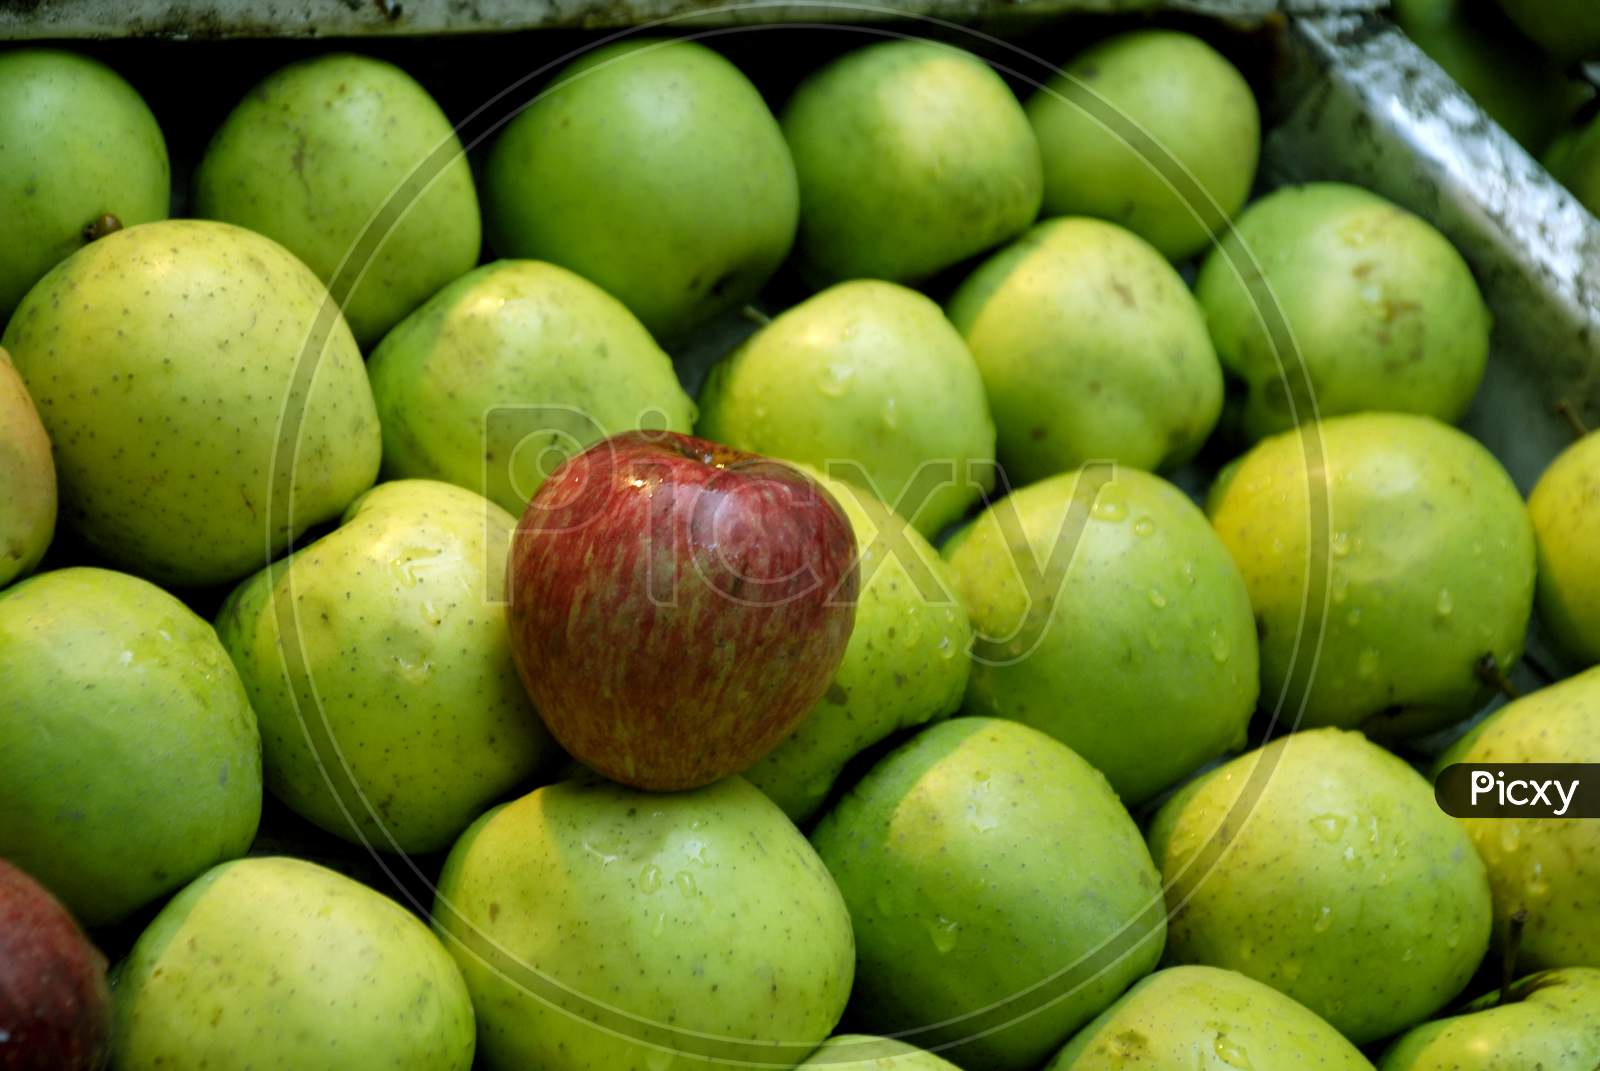 Apples Closeup In an Vendor Stall Forming a Background